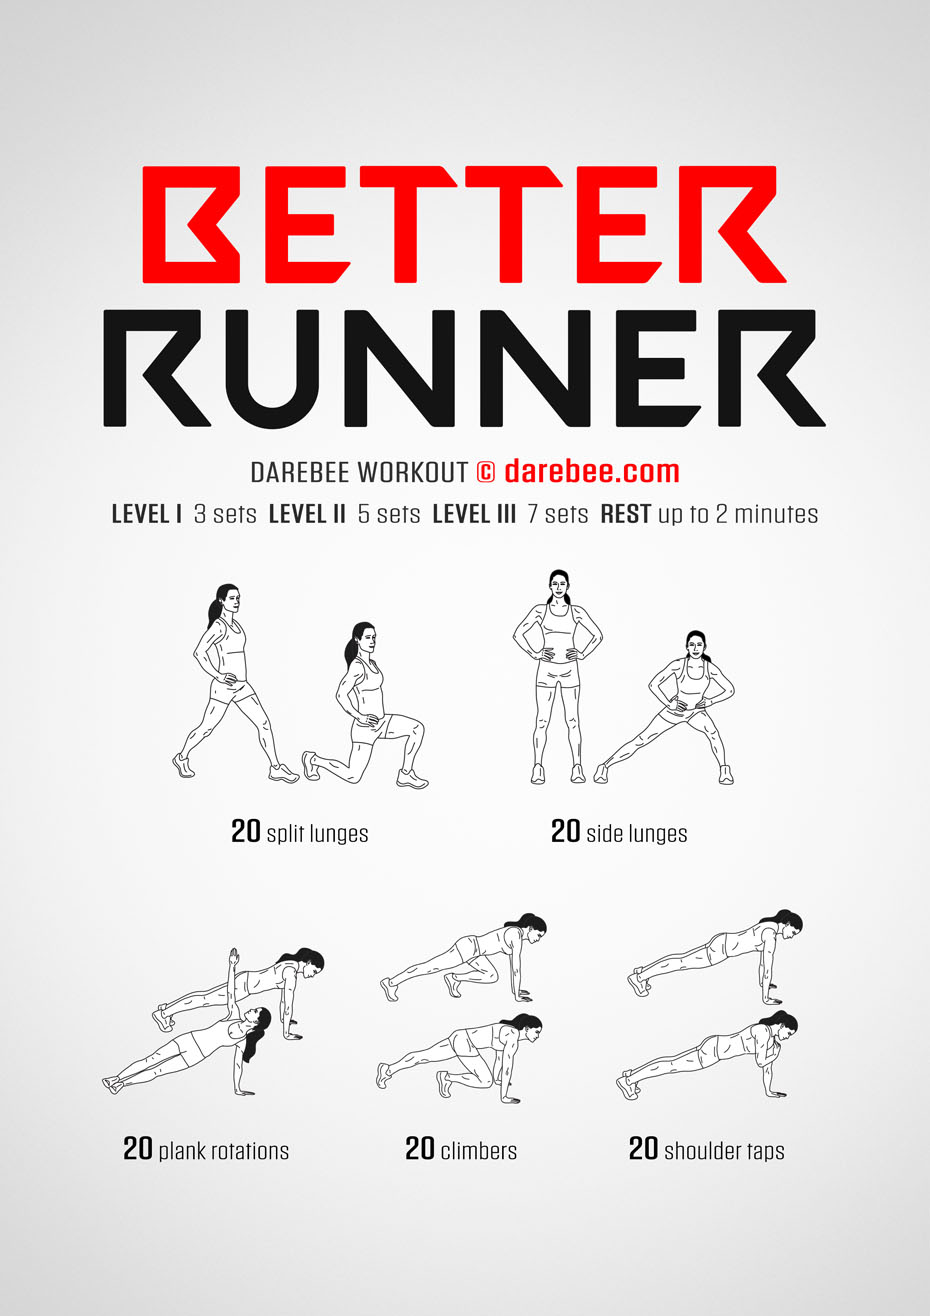 Better Runner is a Darebee home-fitness workout that will help you become a better runner.